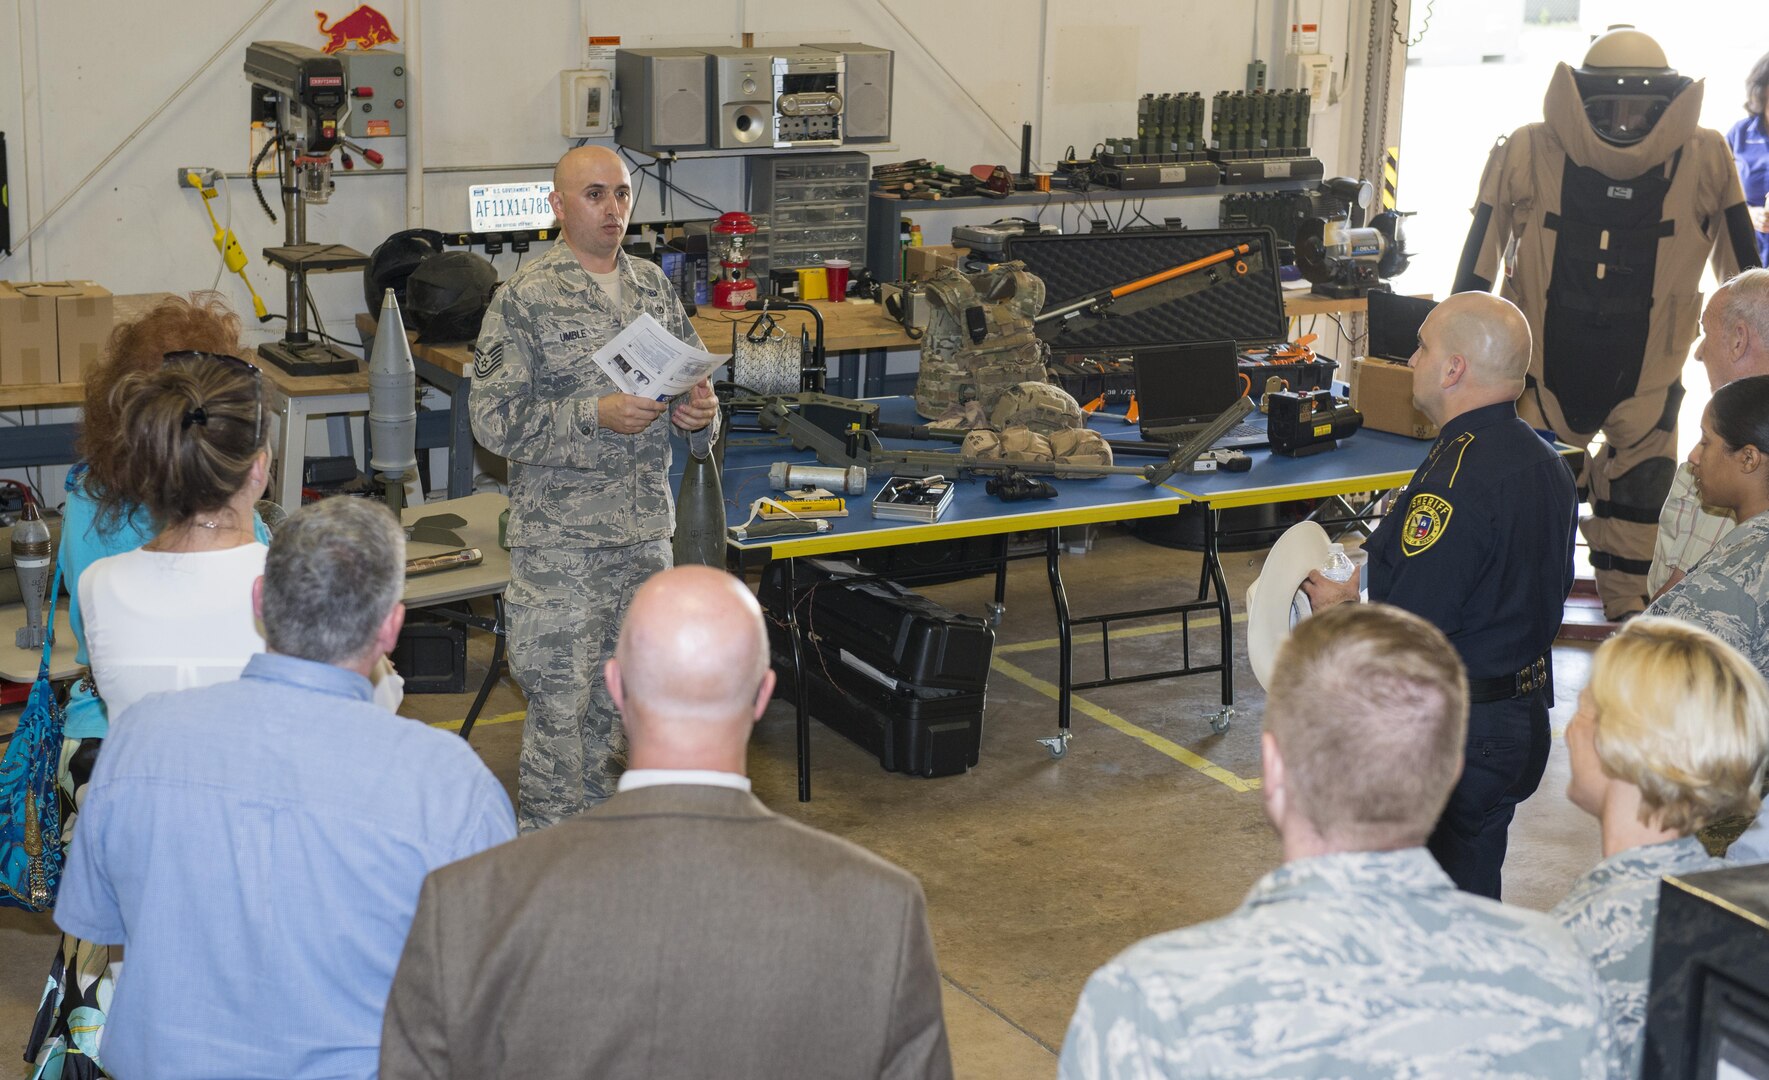 A honorary commanders' tour was hosted on Aug. 16, 2017, at Joint Base San Antonio-Lackland, Texas.